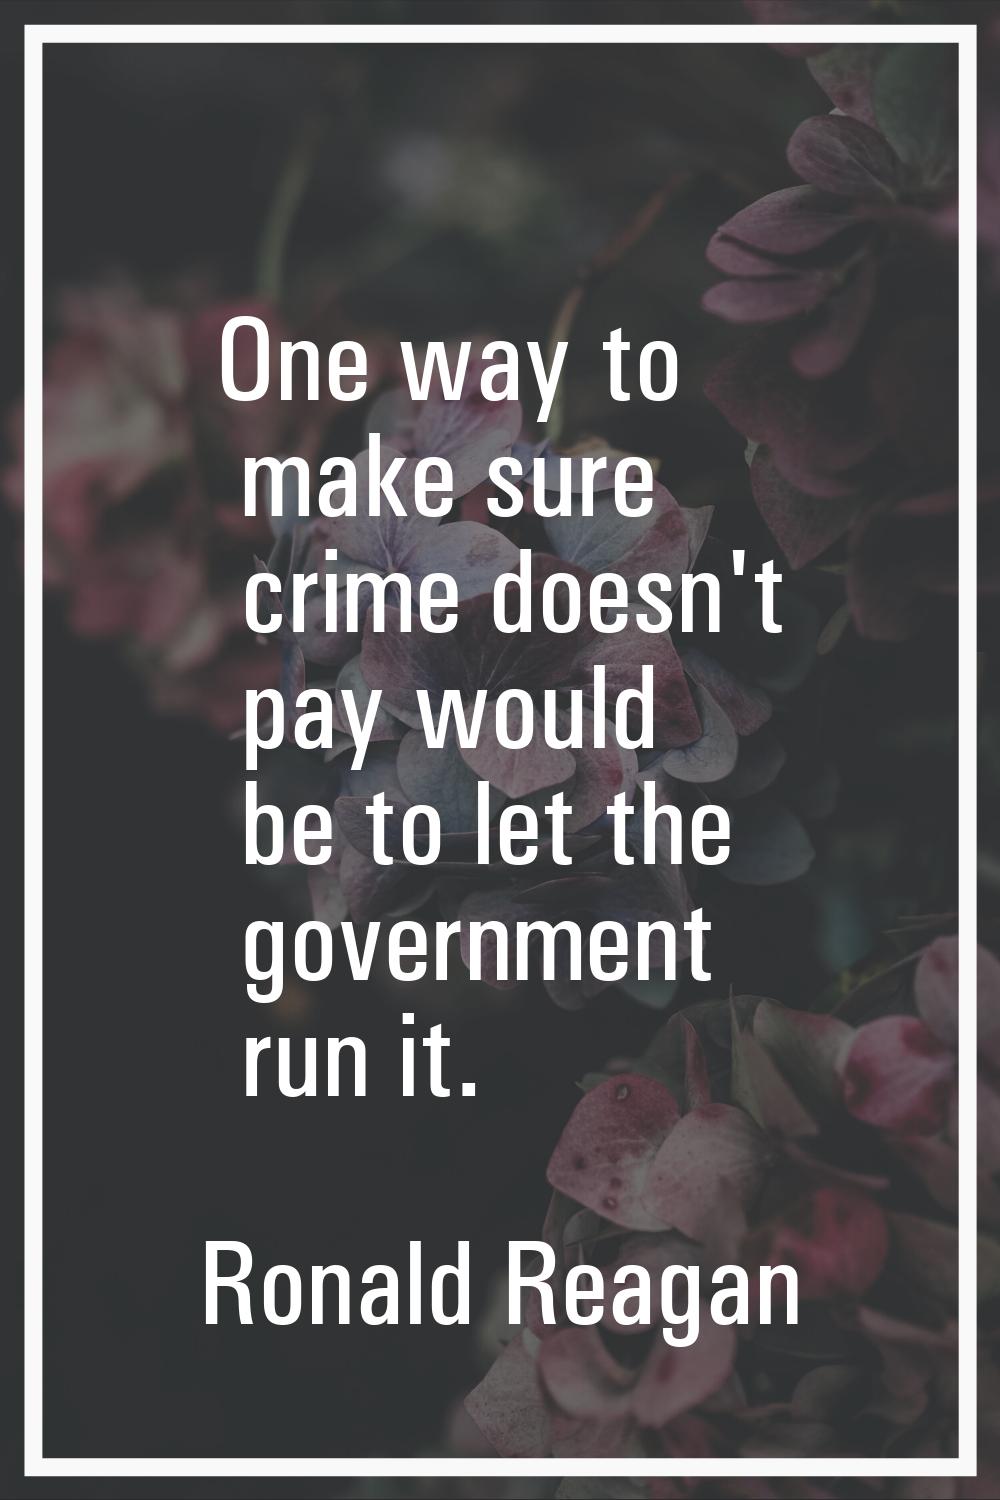 One way to make sure crime doesn't pay would be to let the government run it.